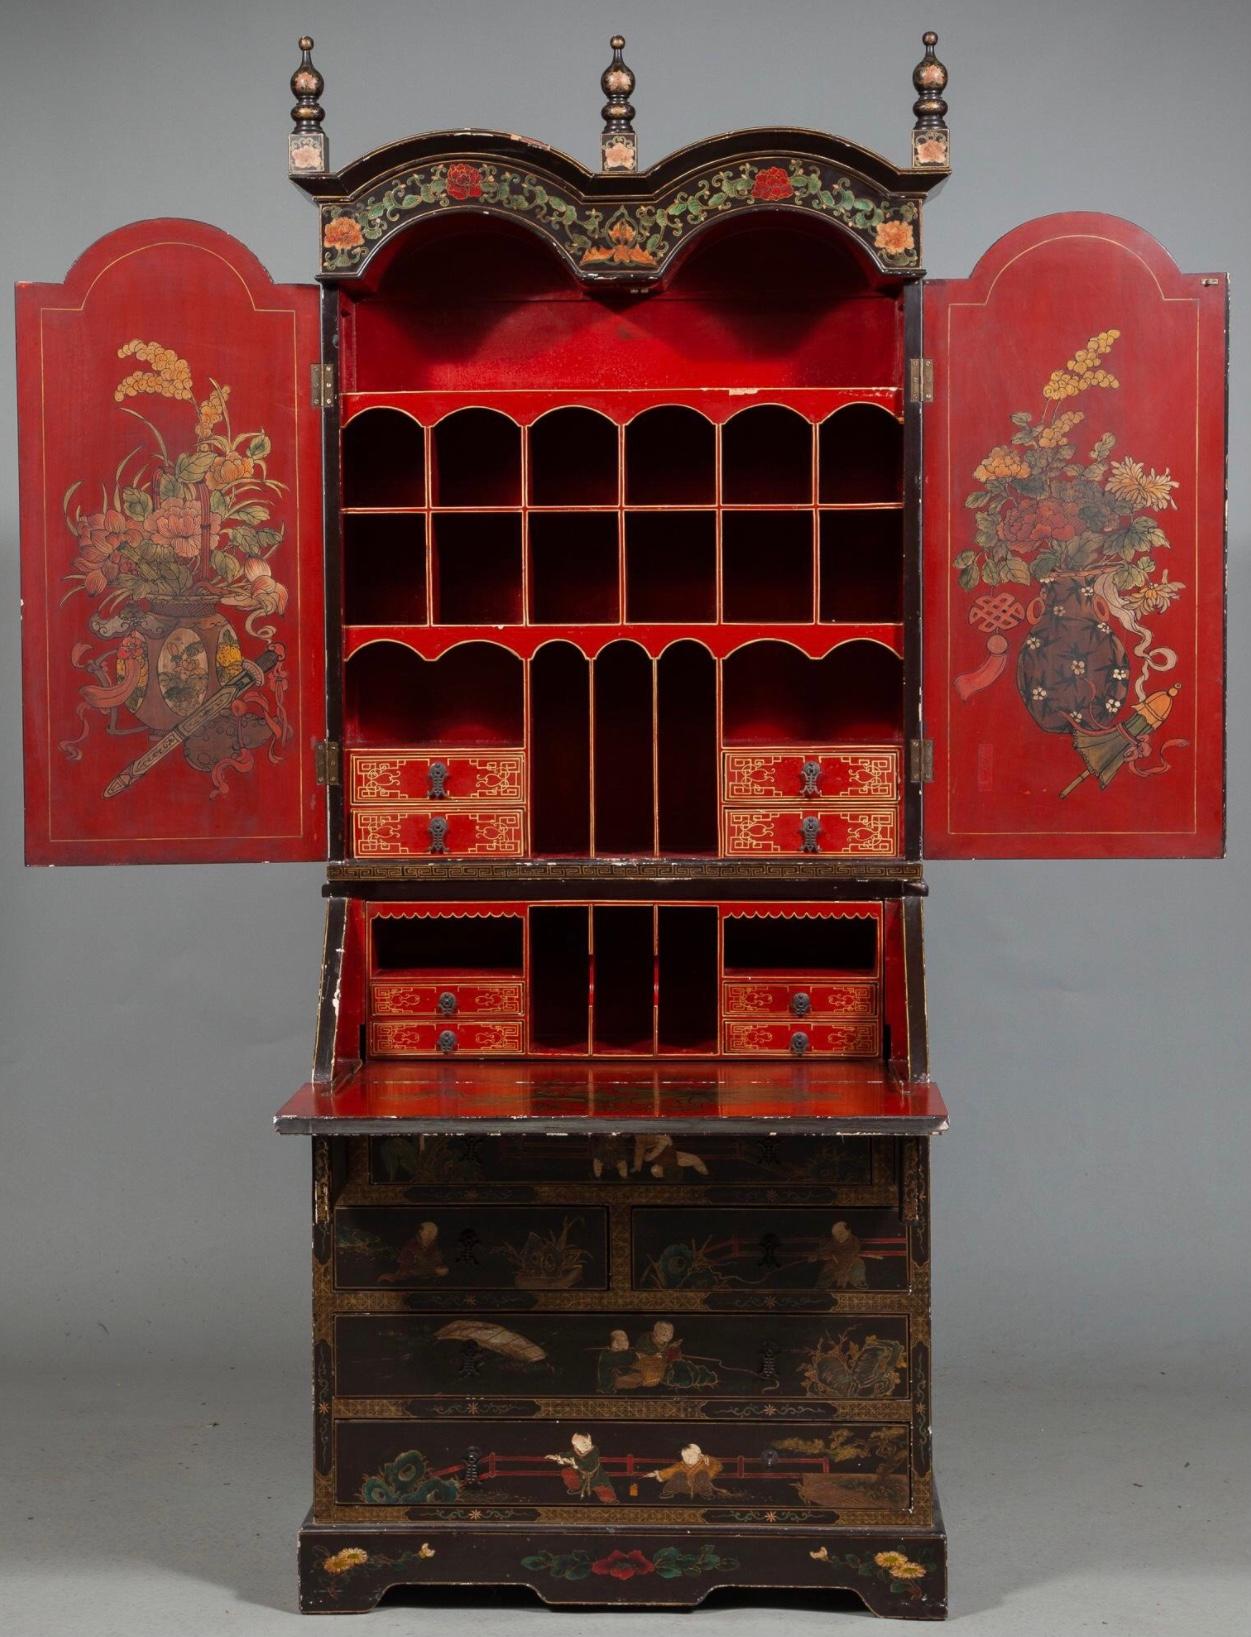 This chinoiserie faux coromandel secretary with it’s intricate japanning. The upper portion is full of drawers and cubby holes, with a fold down writing surface. The bottom section large drawers for ample storage.